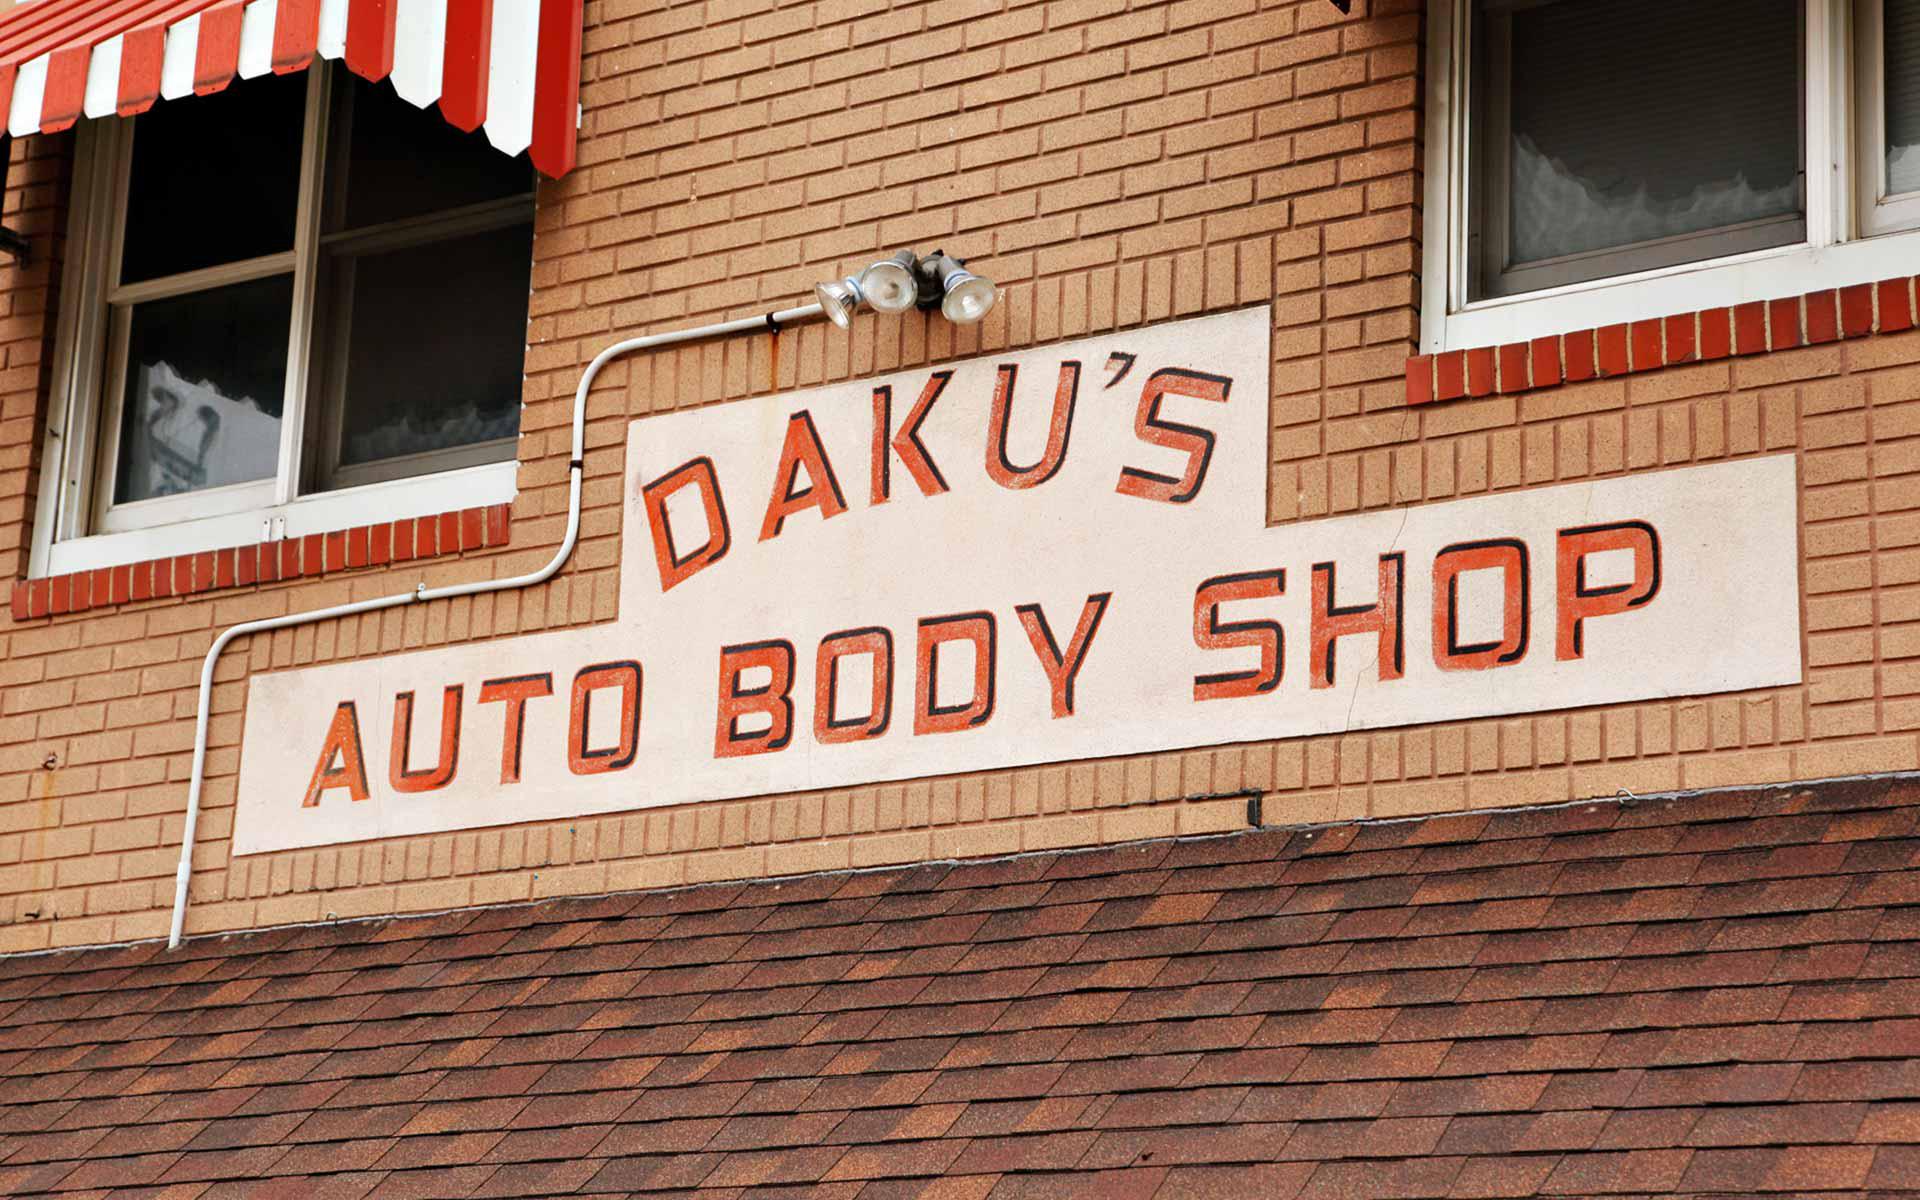 Daku’s Auto Body Shop has been a family-owned and operated auto body shop since 1948! We specialize in collision auto care and strive to deliver an exceptional experience from start to finish. In our seven decades of existence, we’ve always put your safety ahead of all else.